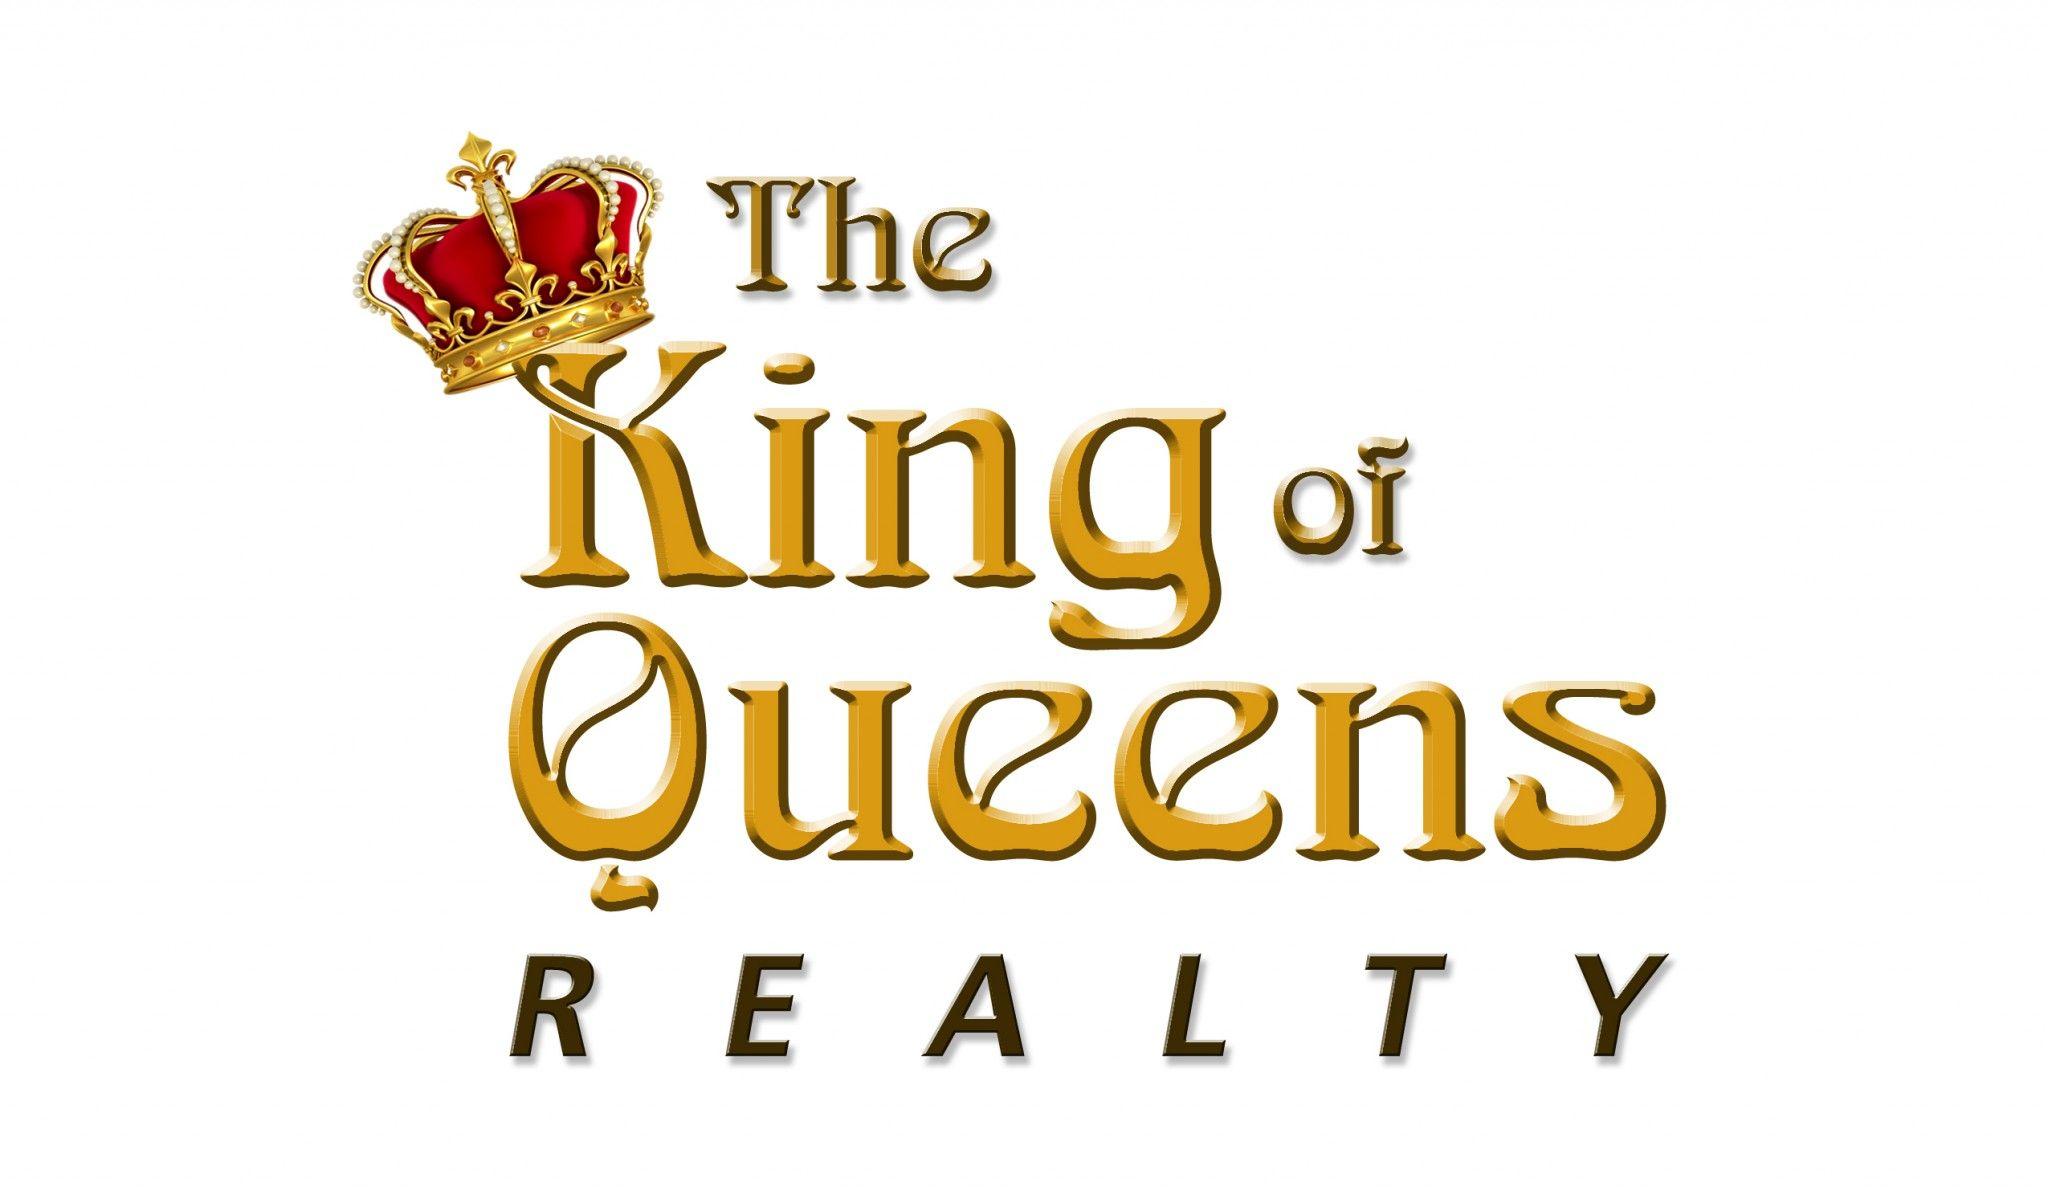 The King of Queens Logo - About | The King of Queens Realty